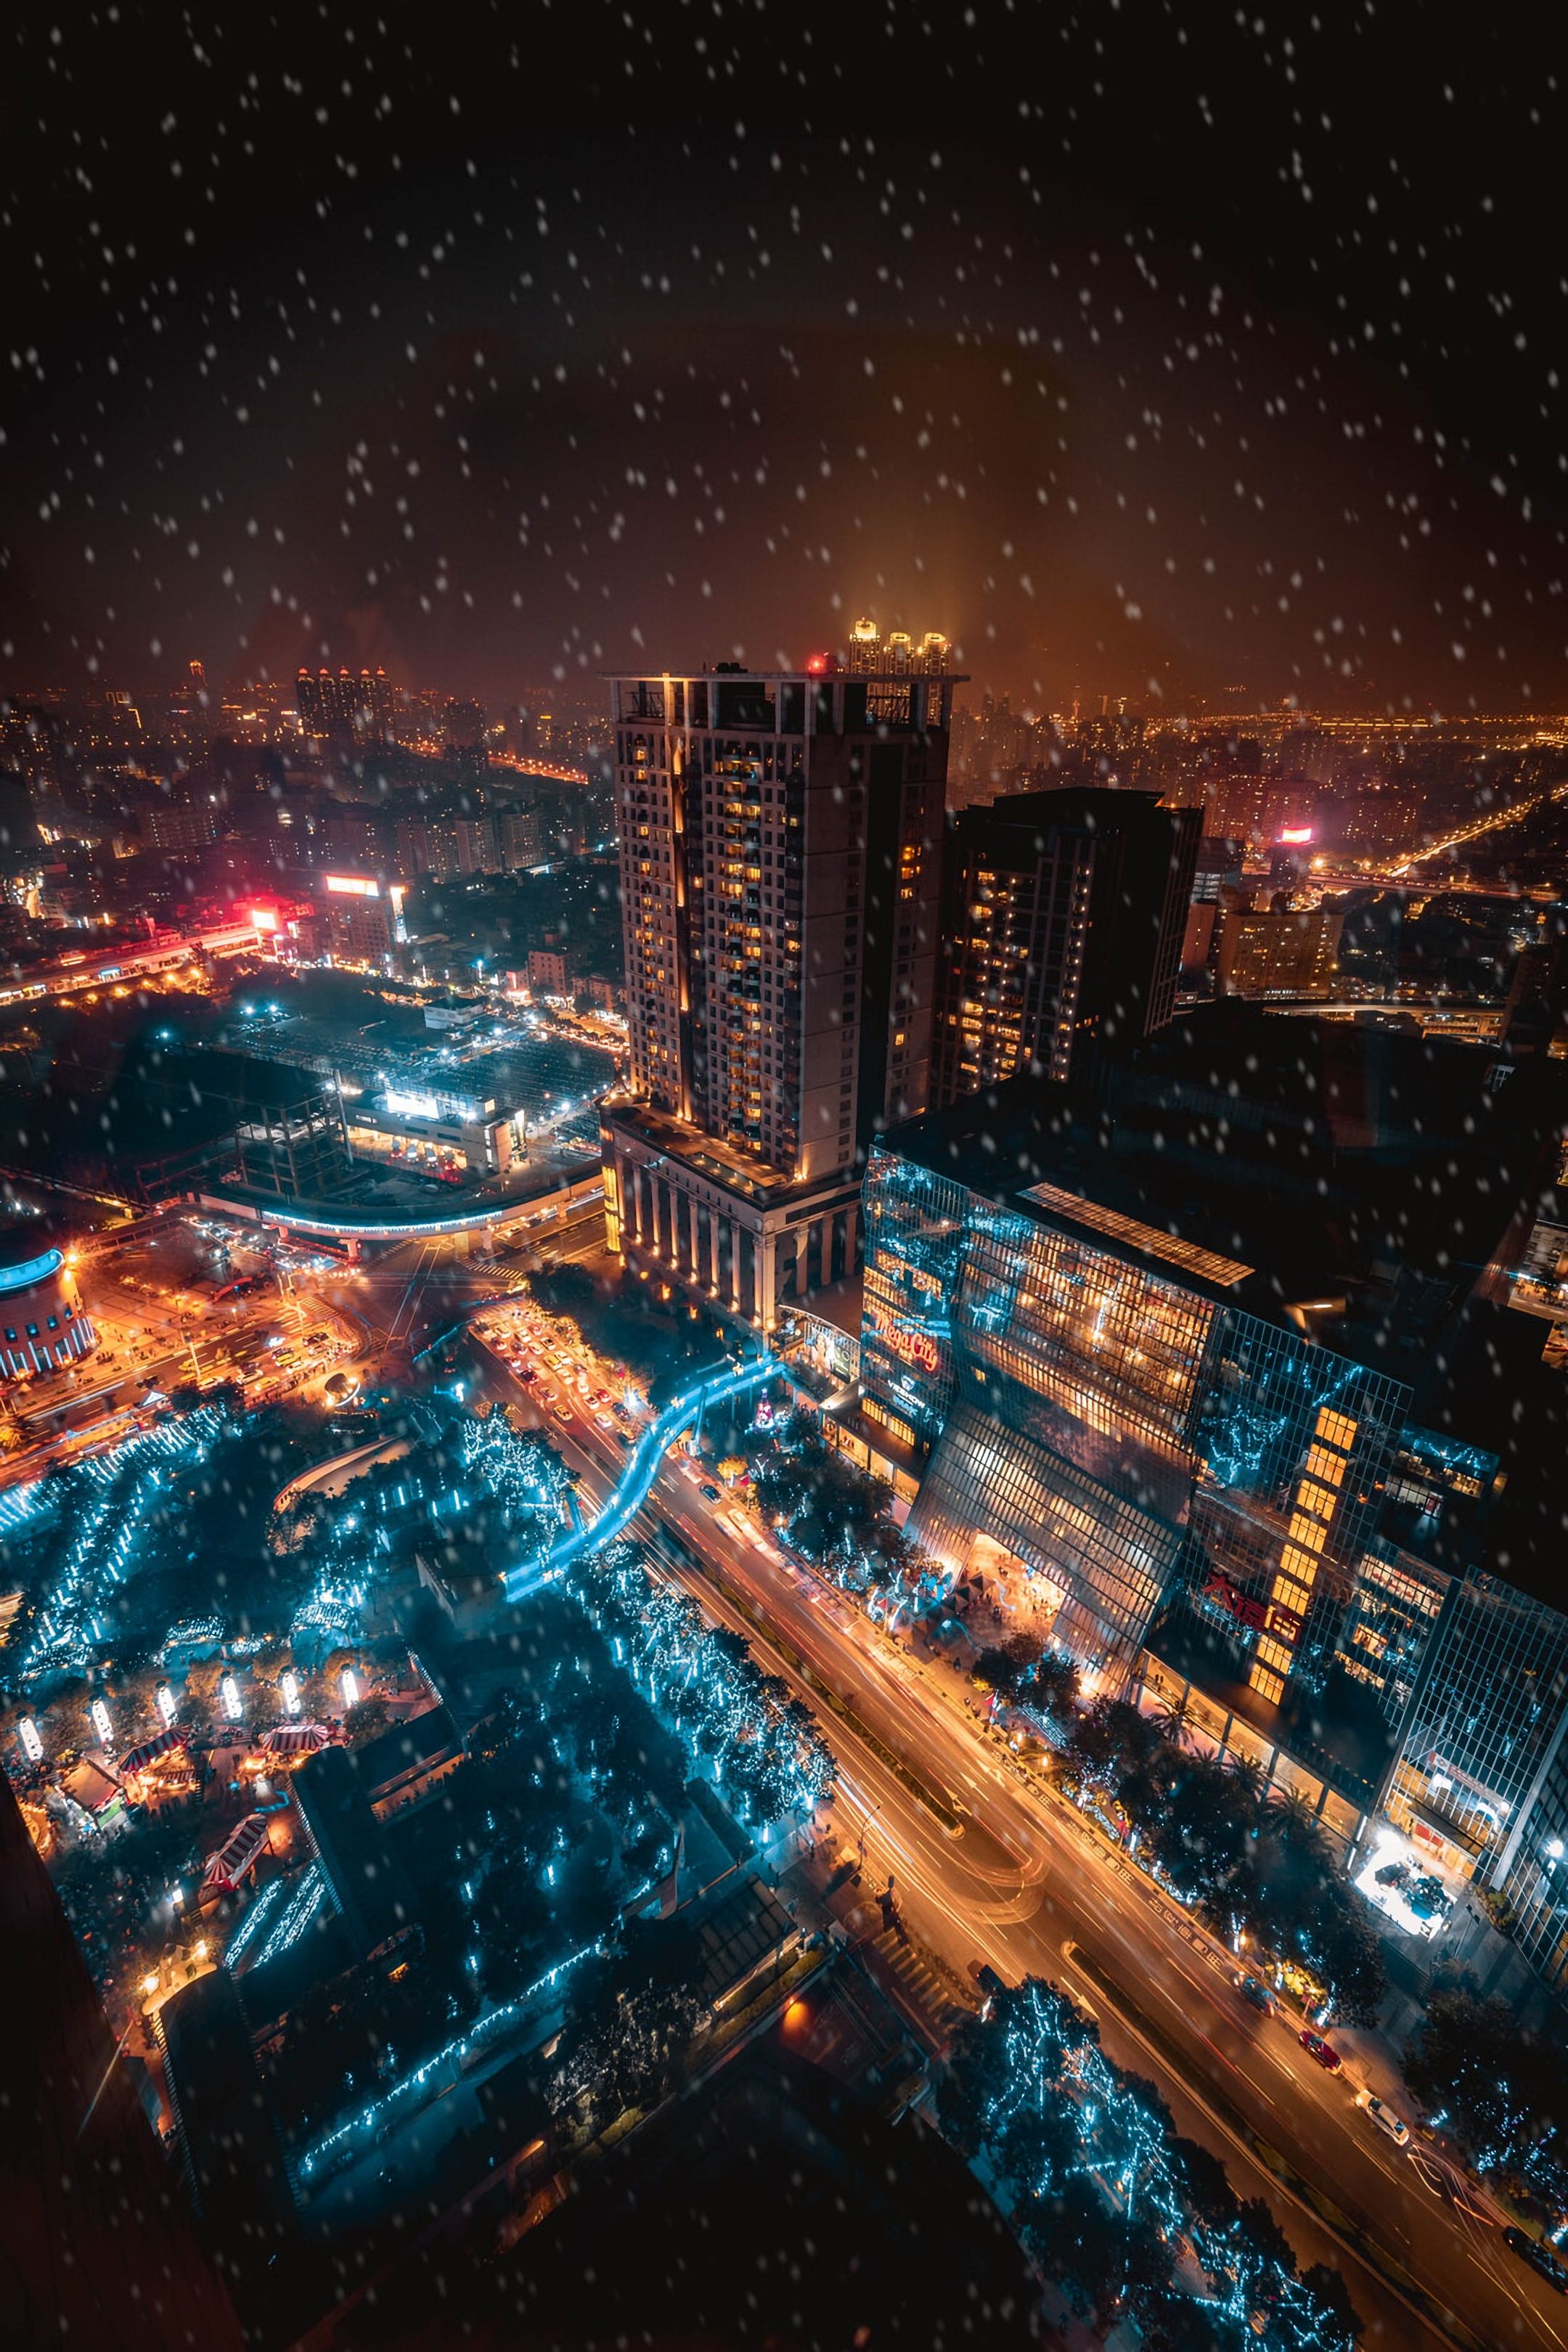 90914 download wallpaper snowfall, cities, night city, city lights, taiwan, taipei screensavers and pictures for free